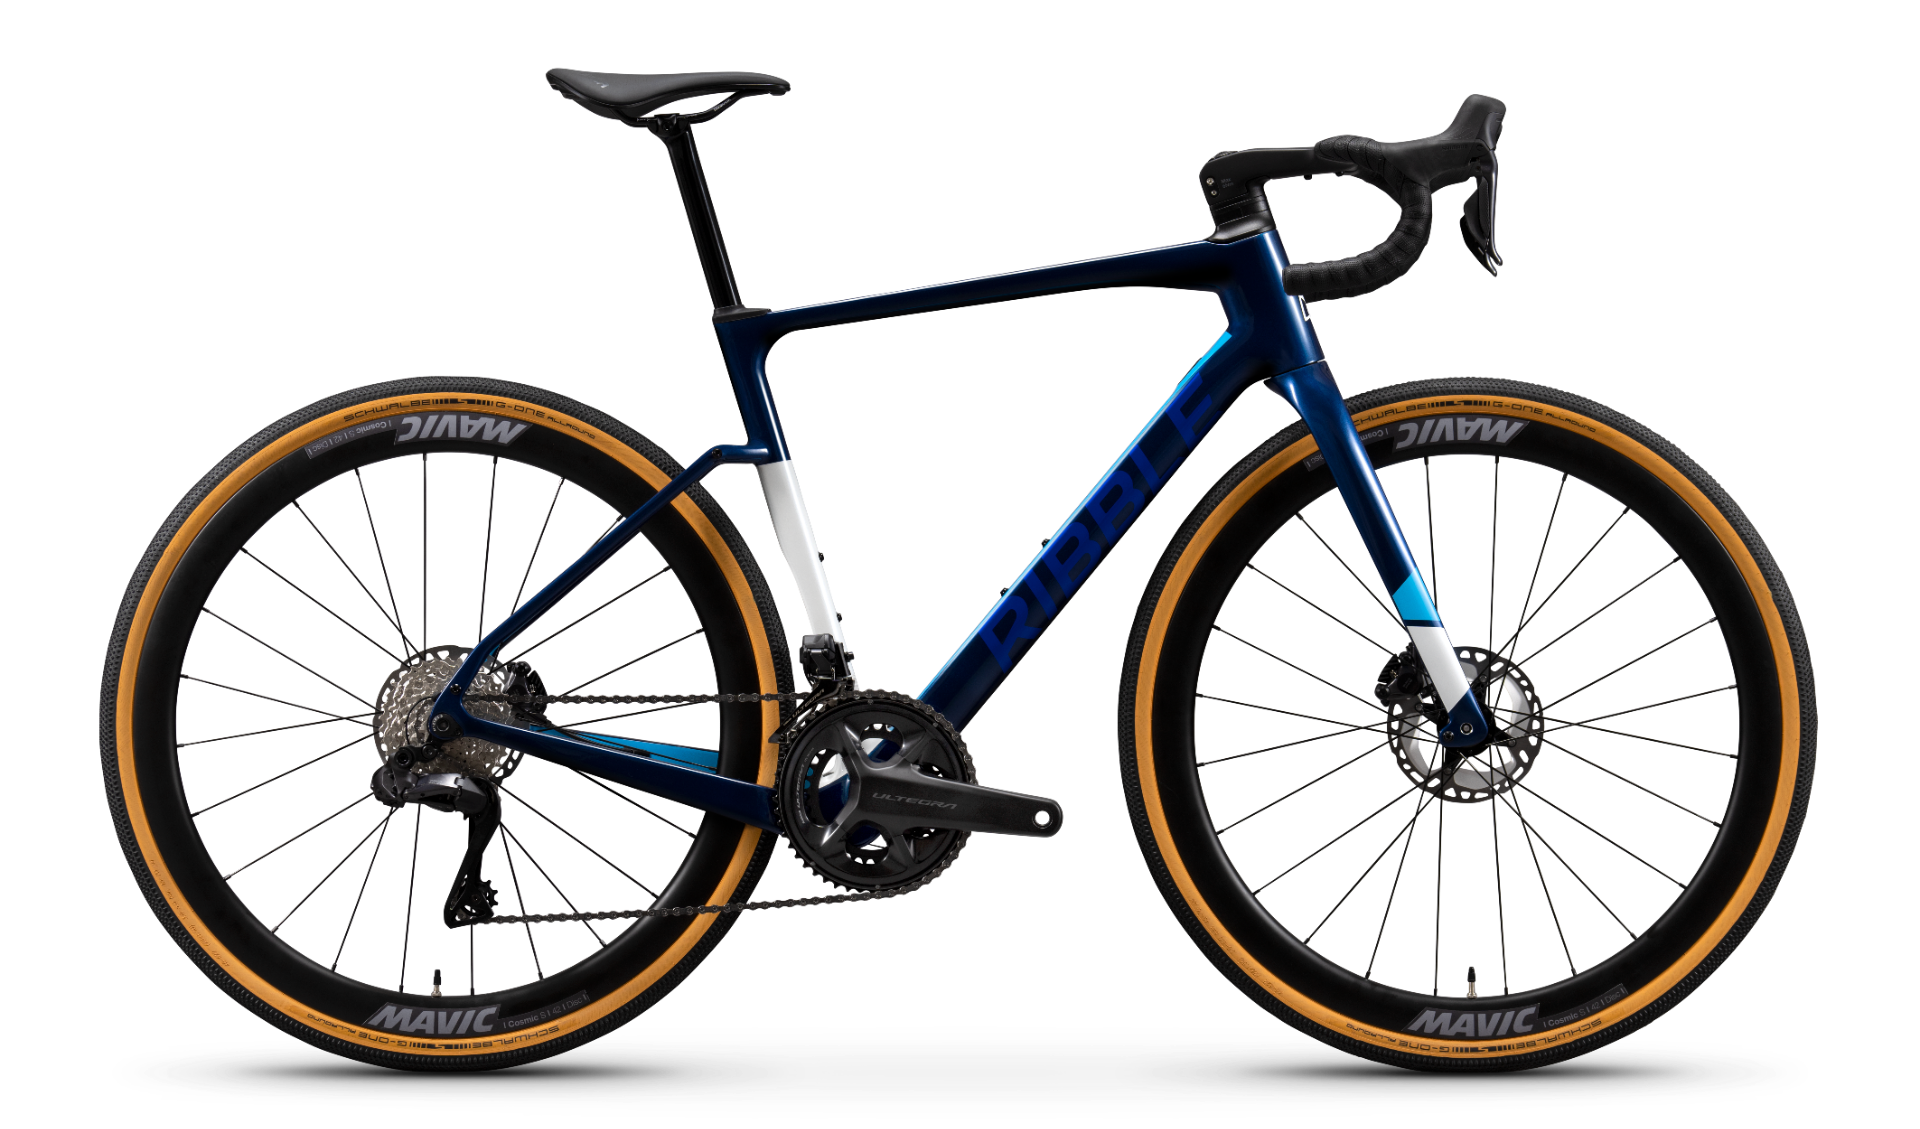 Ribble CGR SL - Pro from Ribble Cycles